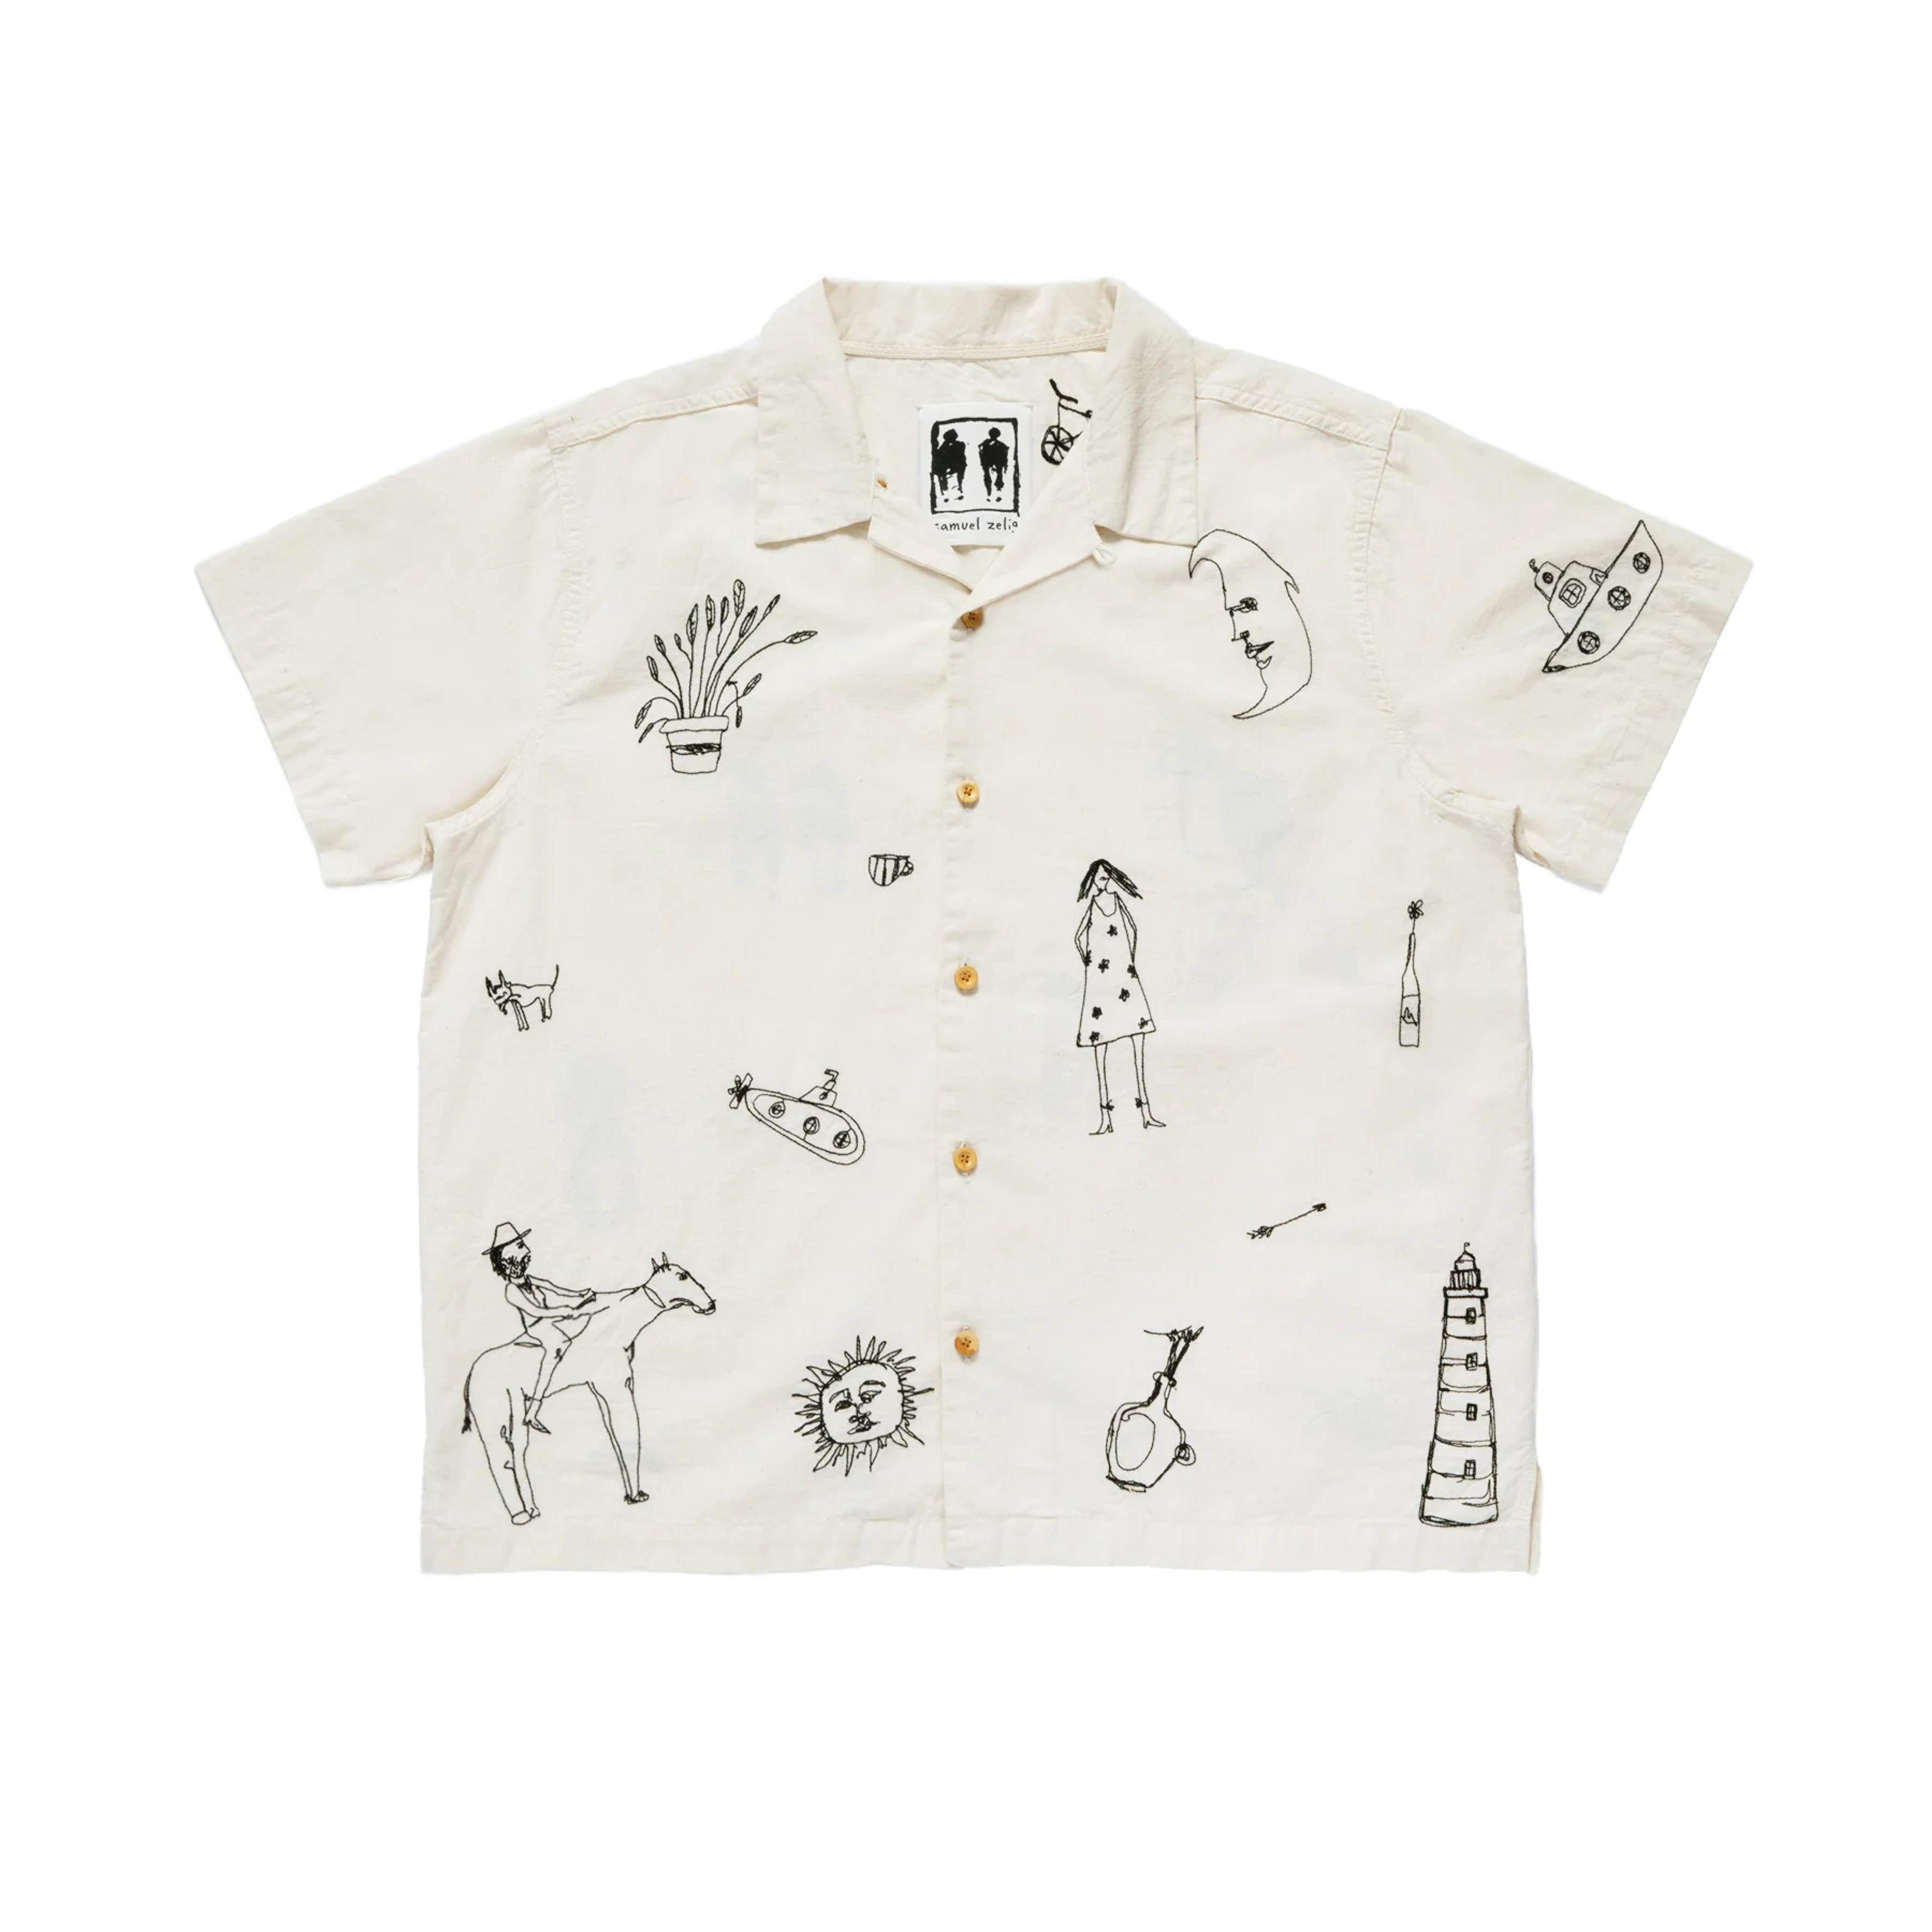 Embroidered Camp Shirt - L